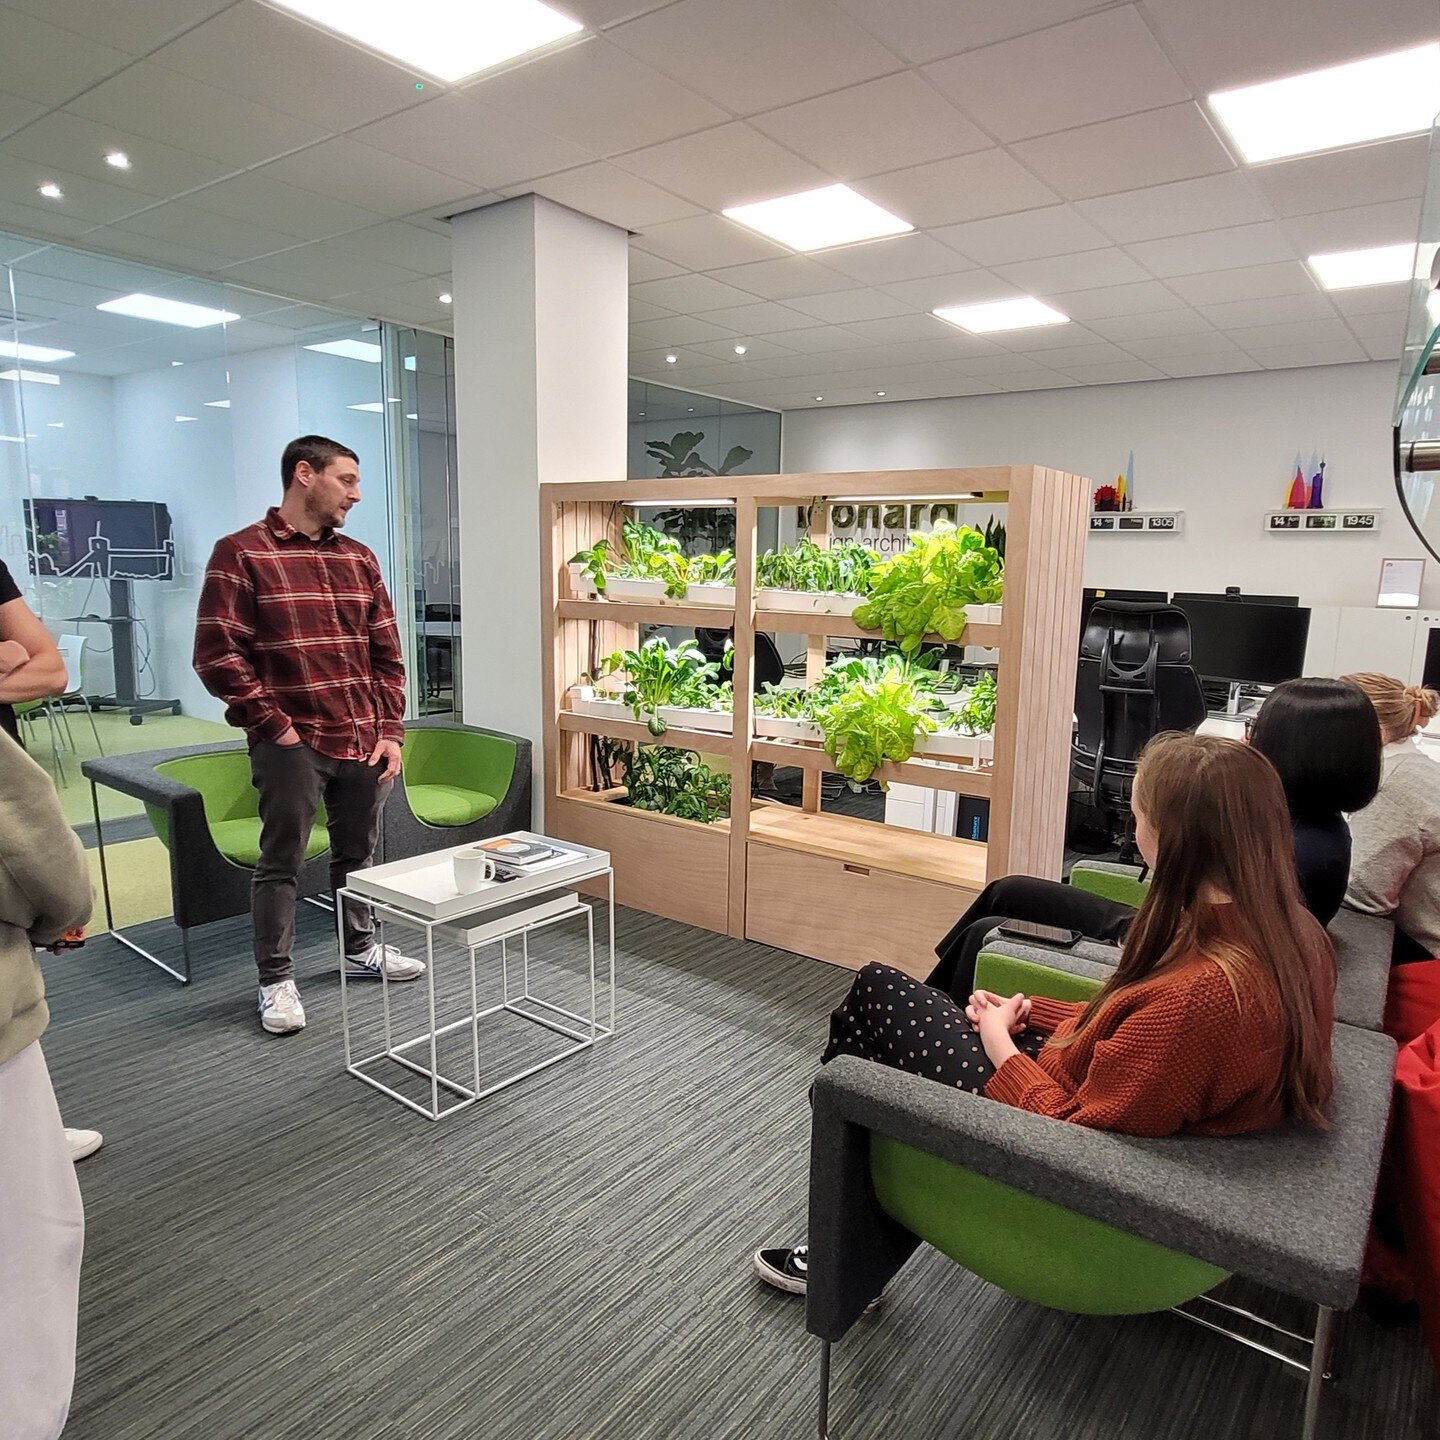 Last week we held the first hydroponic workshop &amp; harvest session with our friends at @leonard_design. Sharing our 'farm to fork' experiences 🥬🌎❤️ 
#earthday #earthdayeveryday #hydroponicgrowing #indoorgrow #vegetables #workshop #farmtofork #le